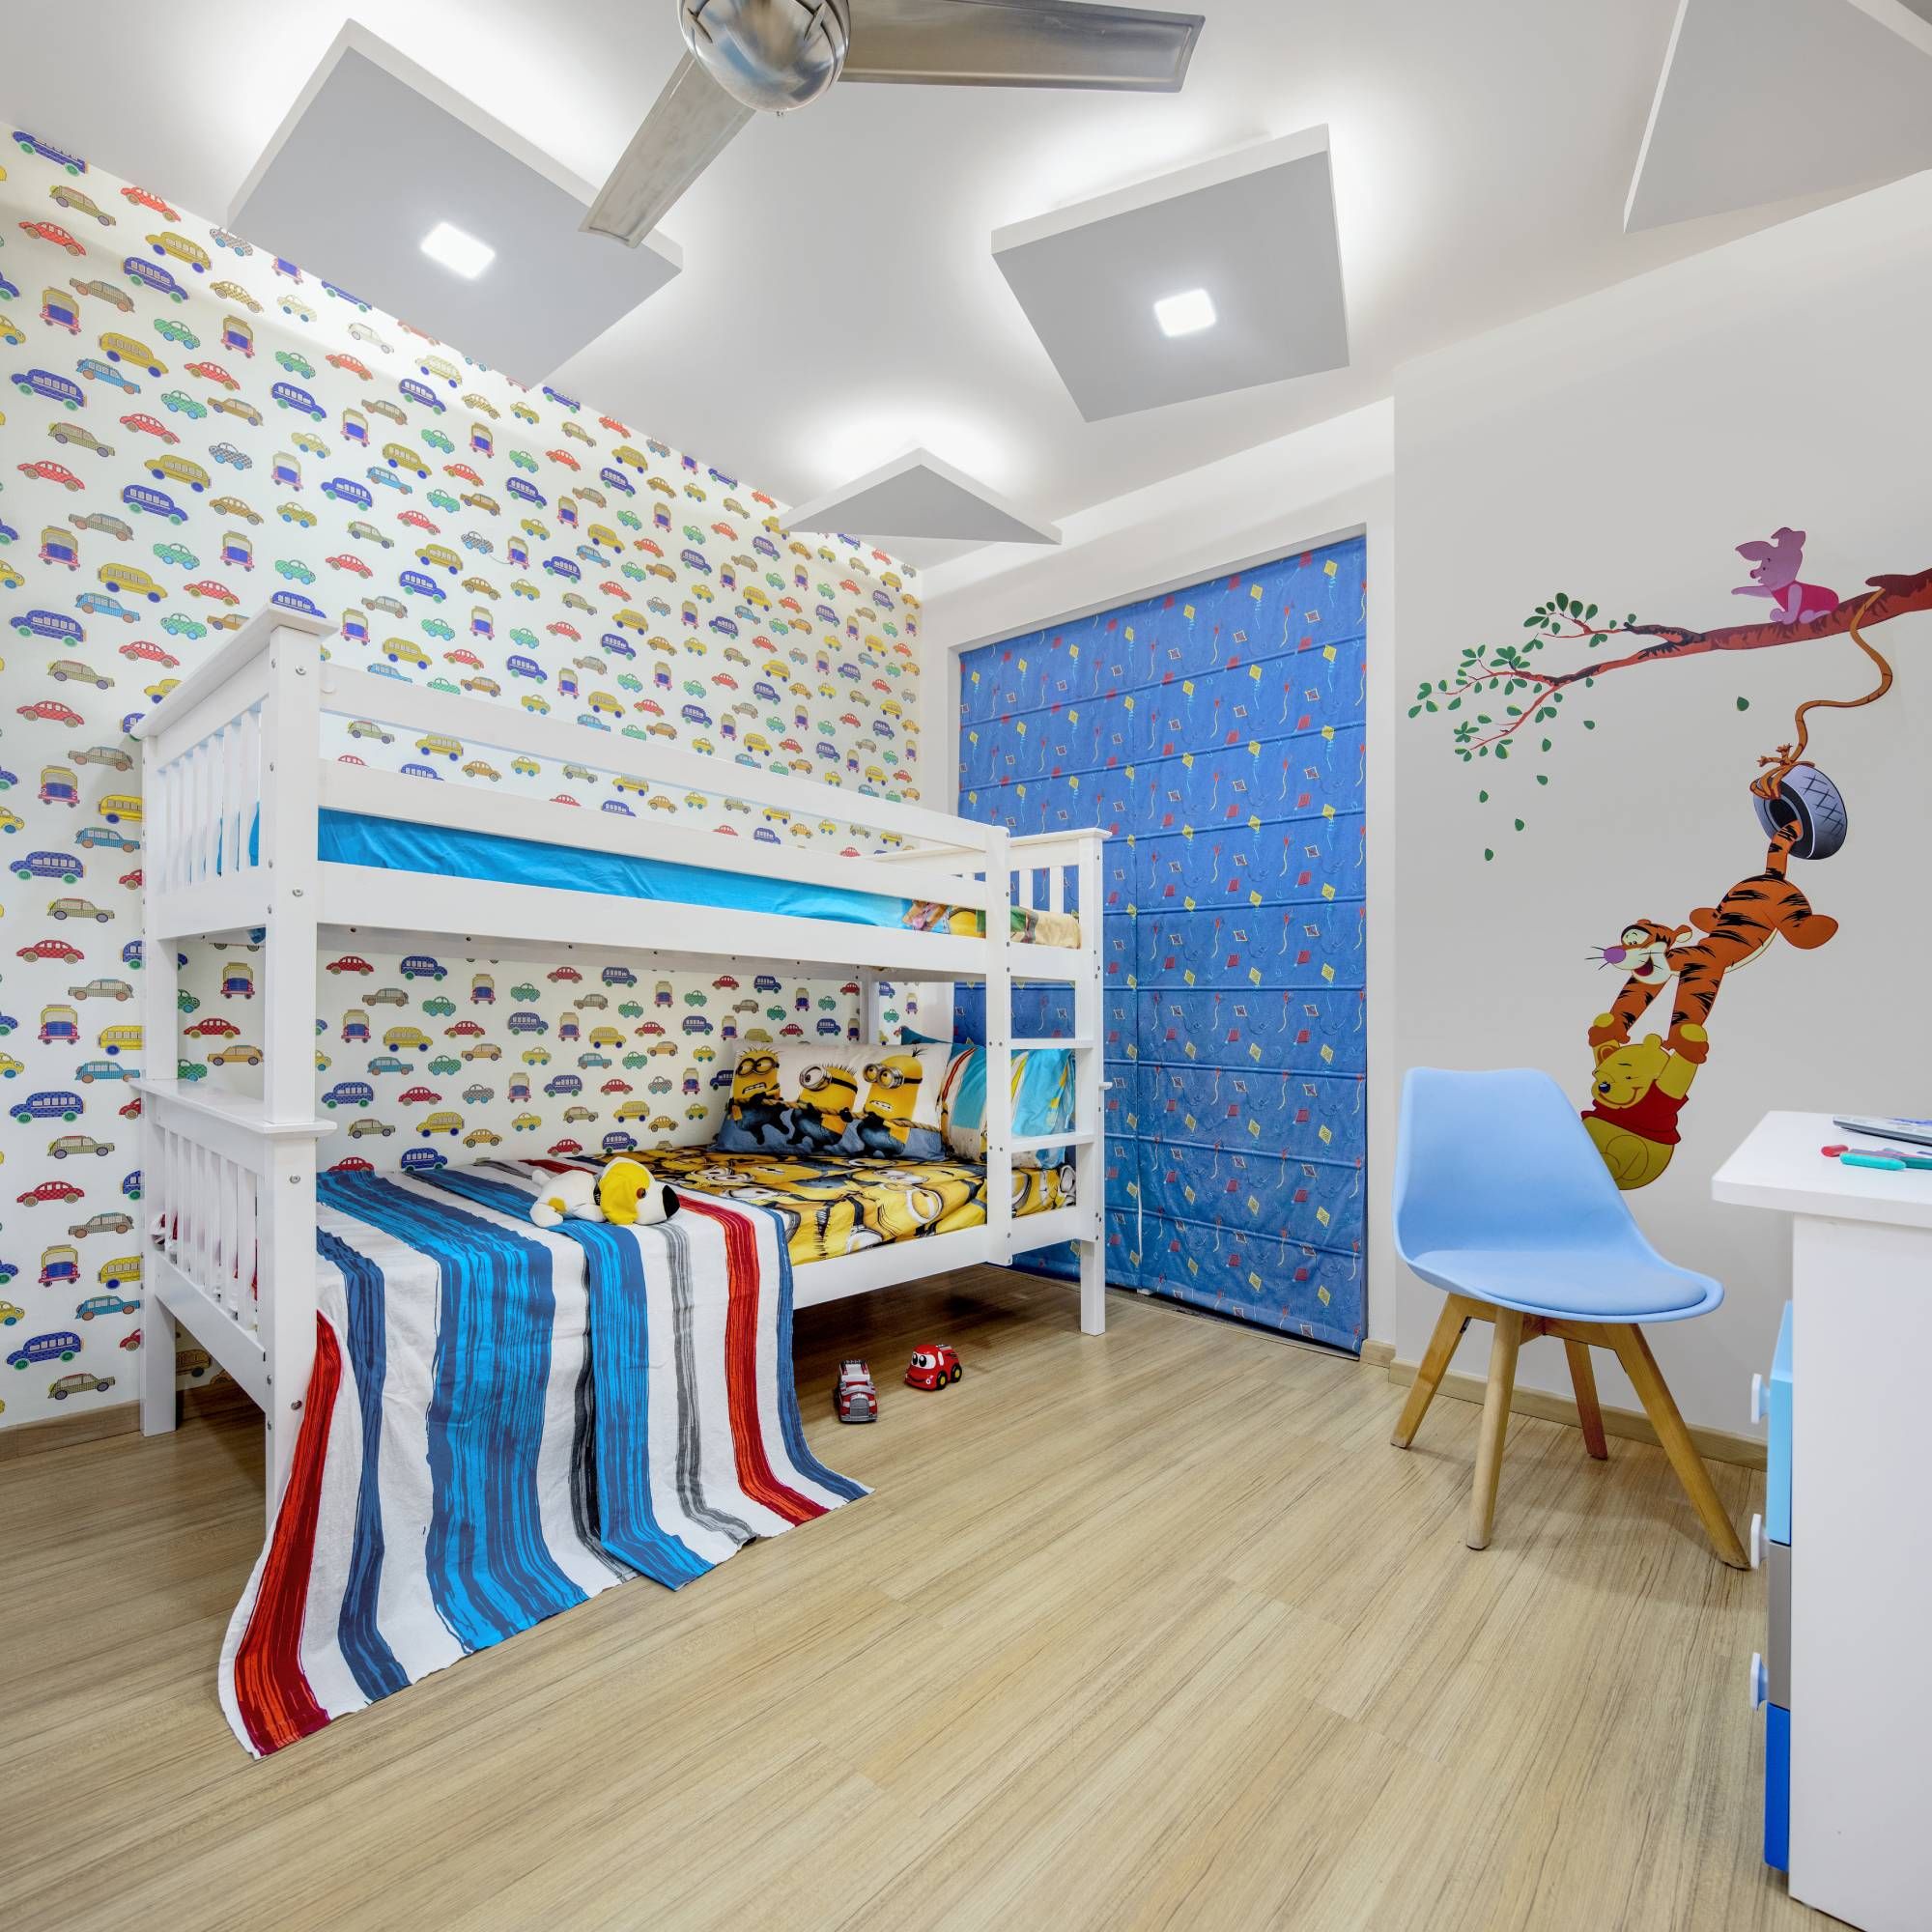 Modern Kids Bedroom Design With A Bunk Bed And Light Wooden Flooring